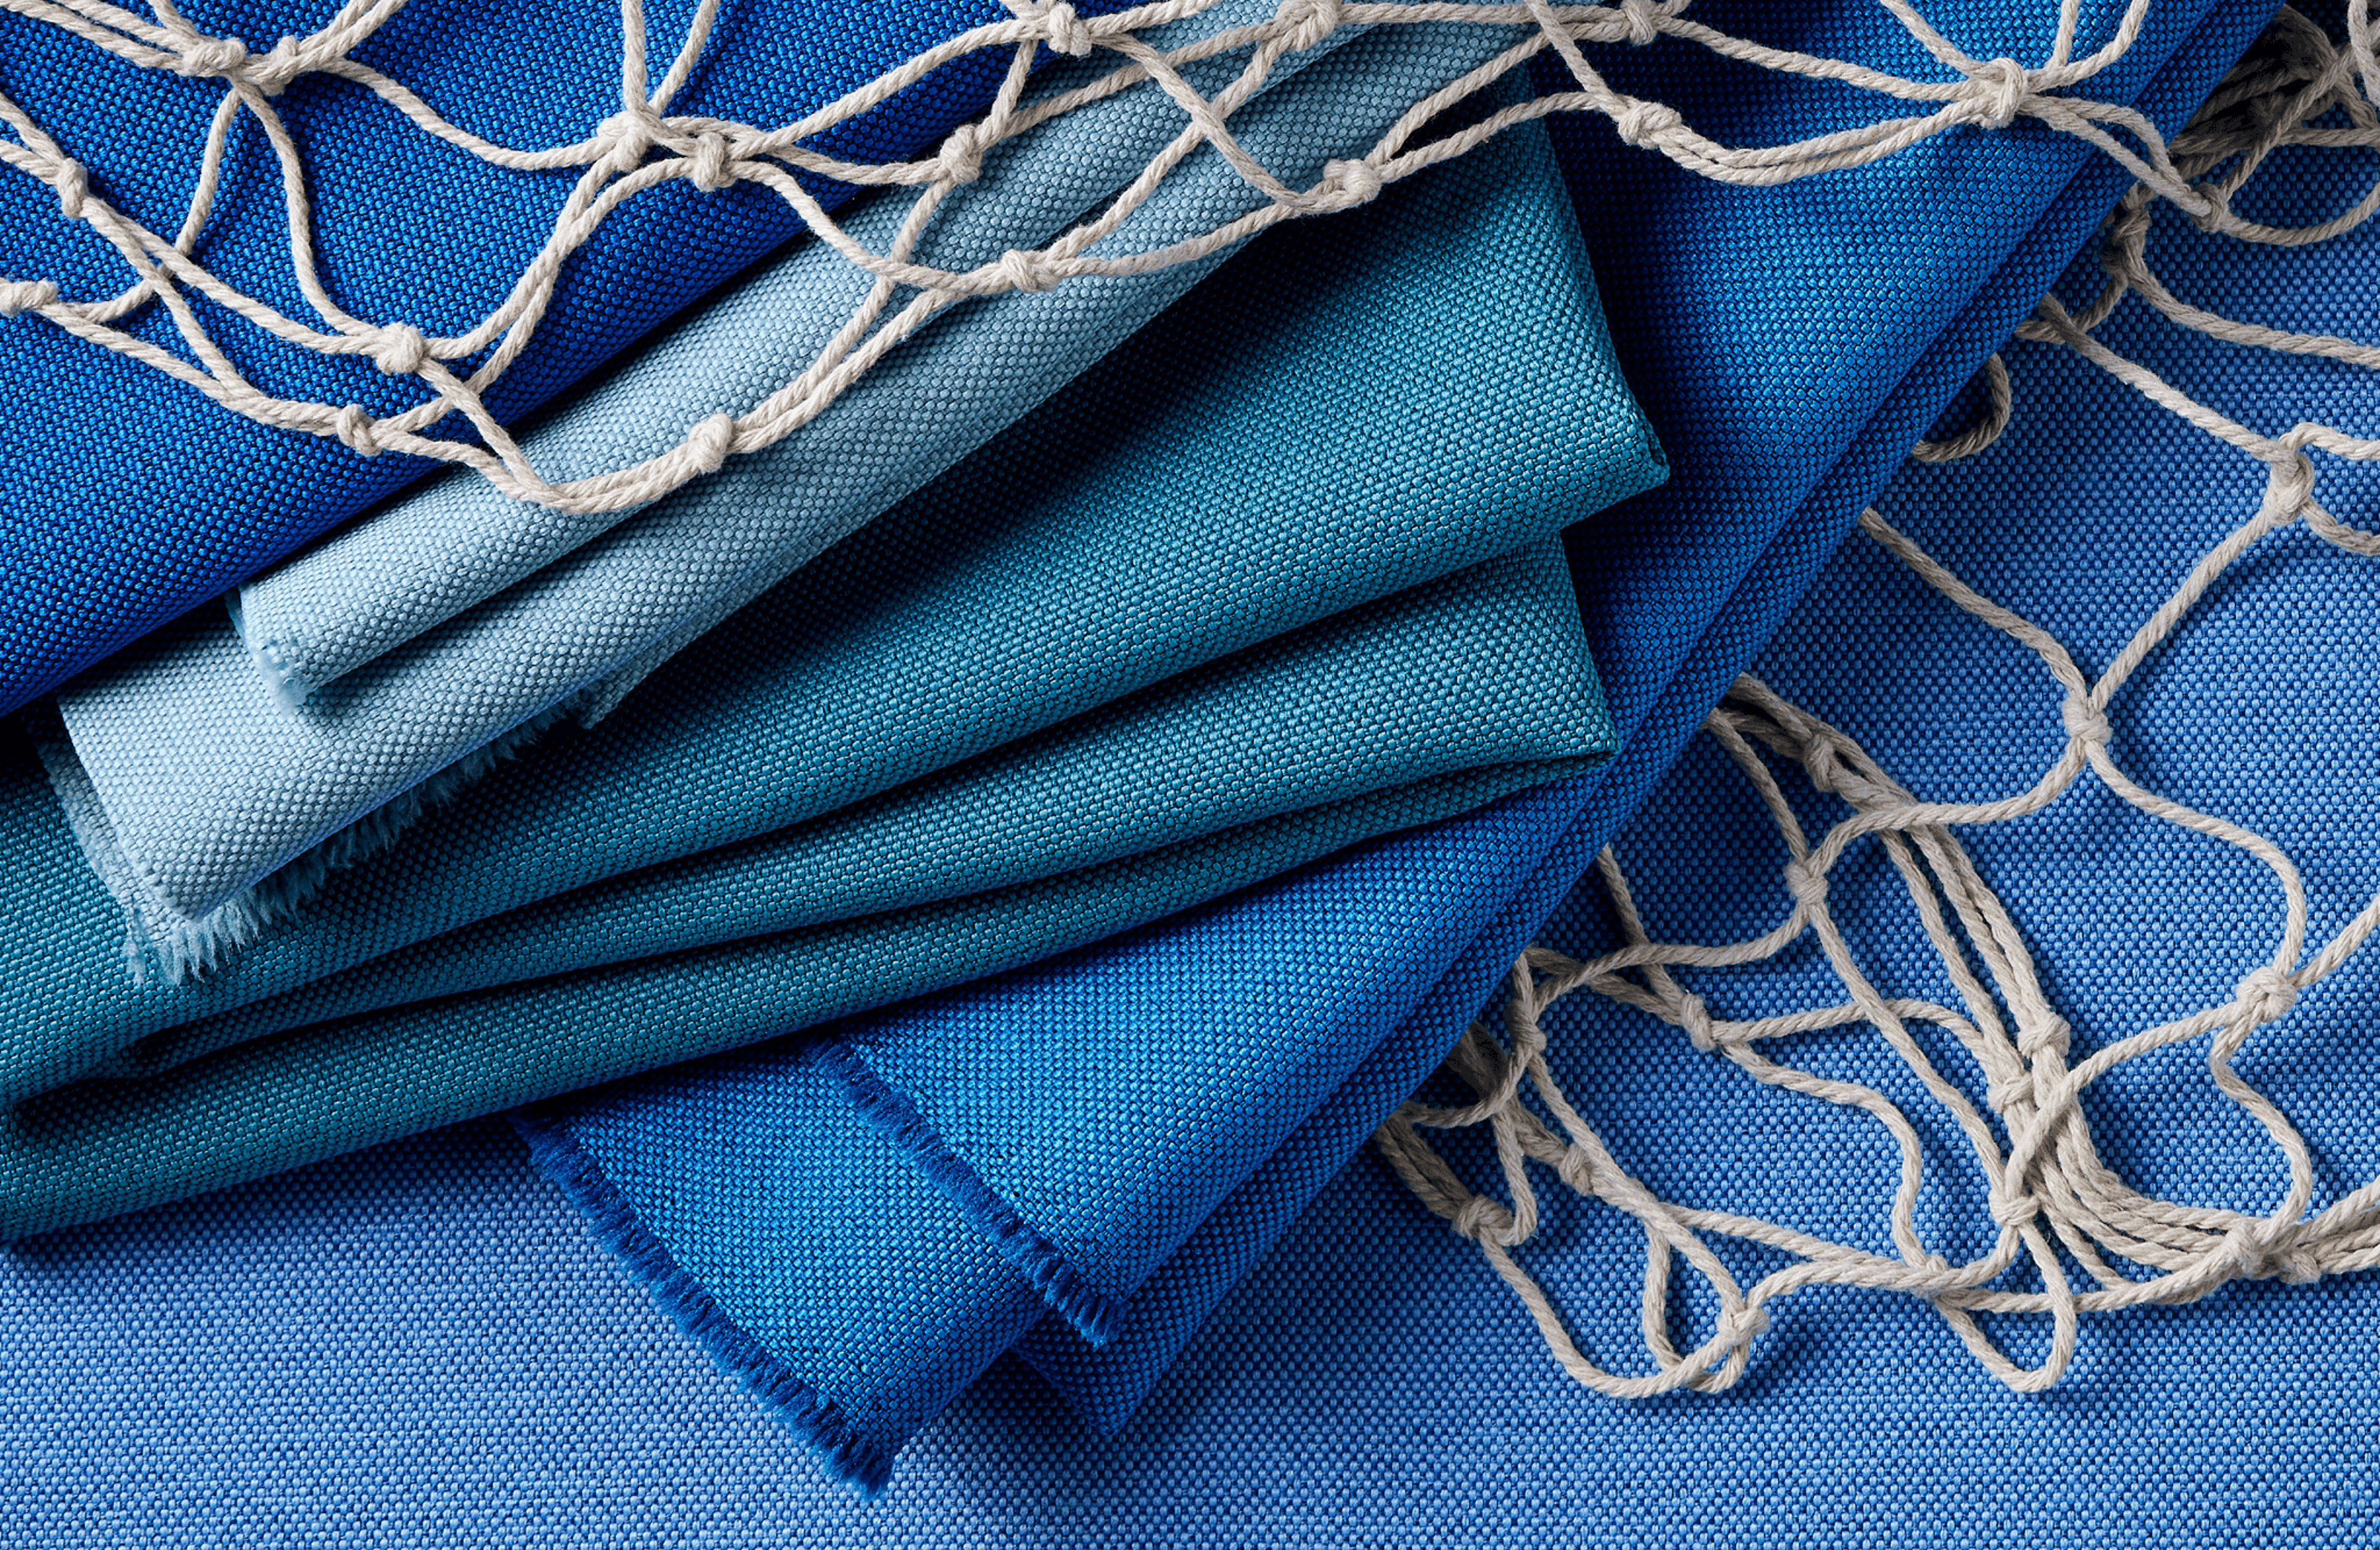 Camira launches Quest, a new SEAQUAL fabric